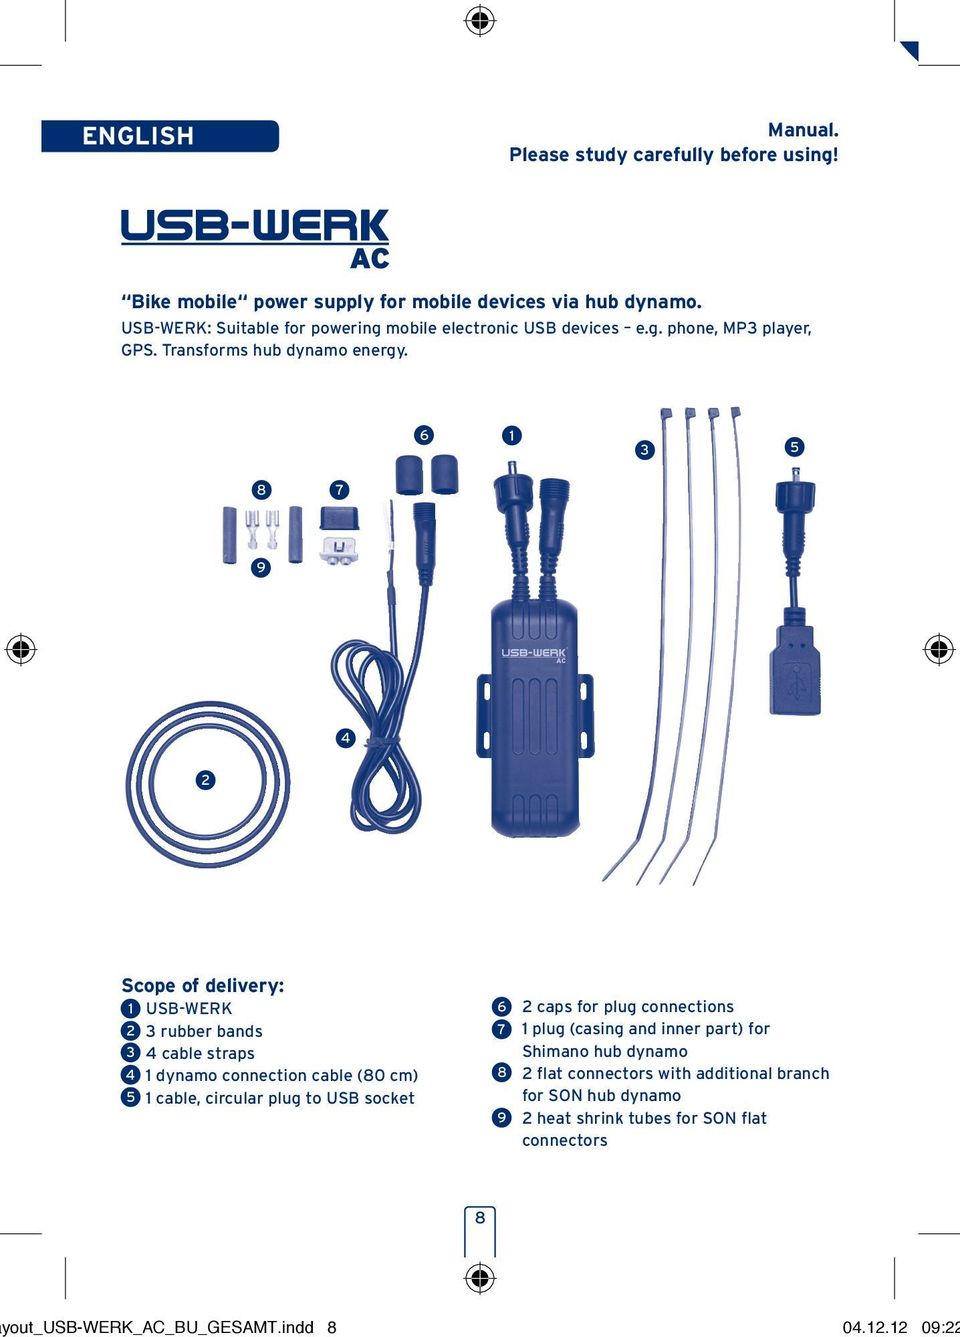 6 1 3 5 8 7 9 4 2 Scope of delivery: 1 USB-WERK 2 3 rubber bands 3 4 cable straps 4 1 dynamo connection cable (80 cm) 5 1 cable, circular plug to USB socket 6